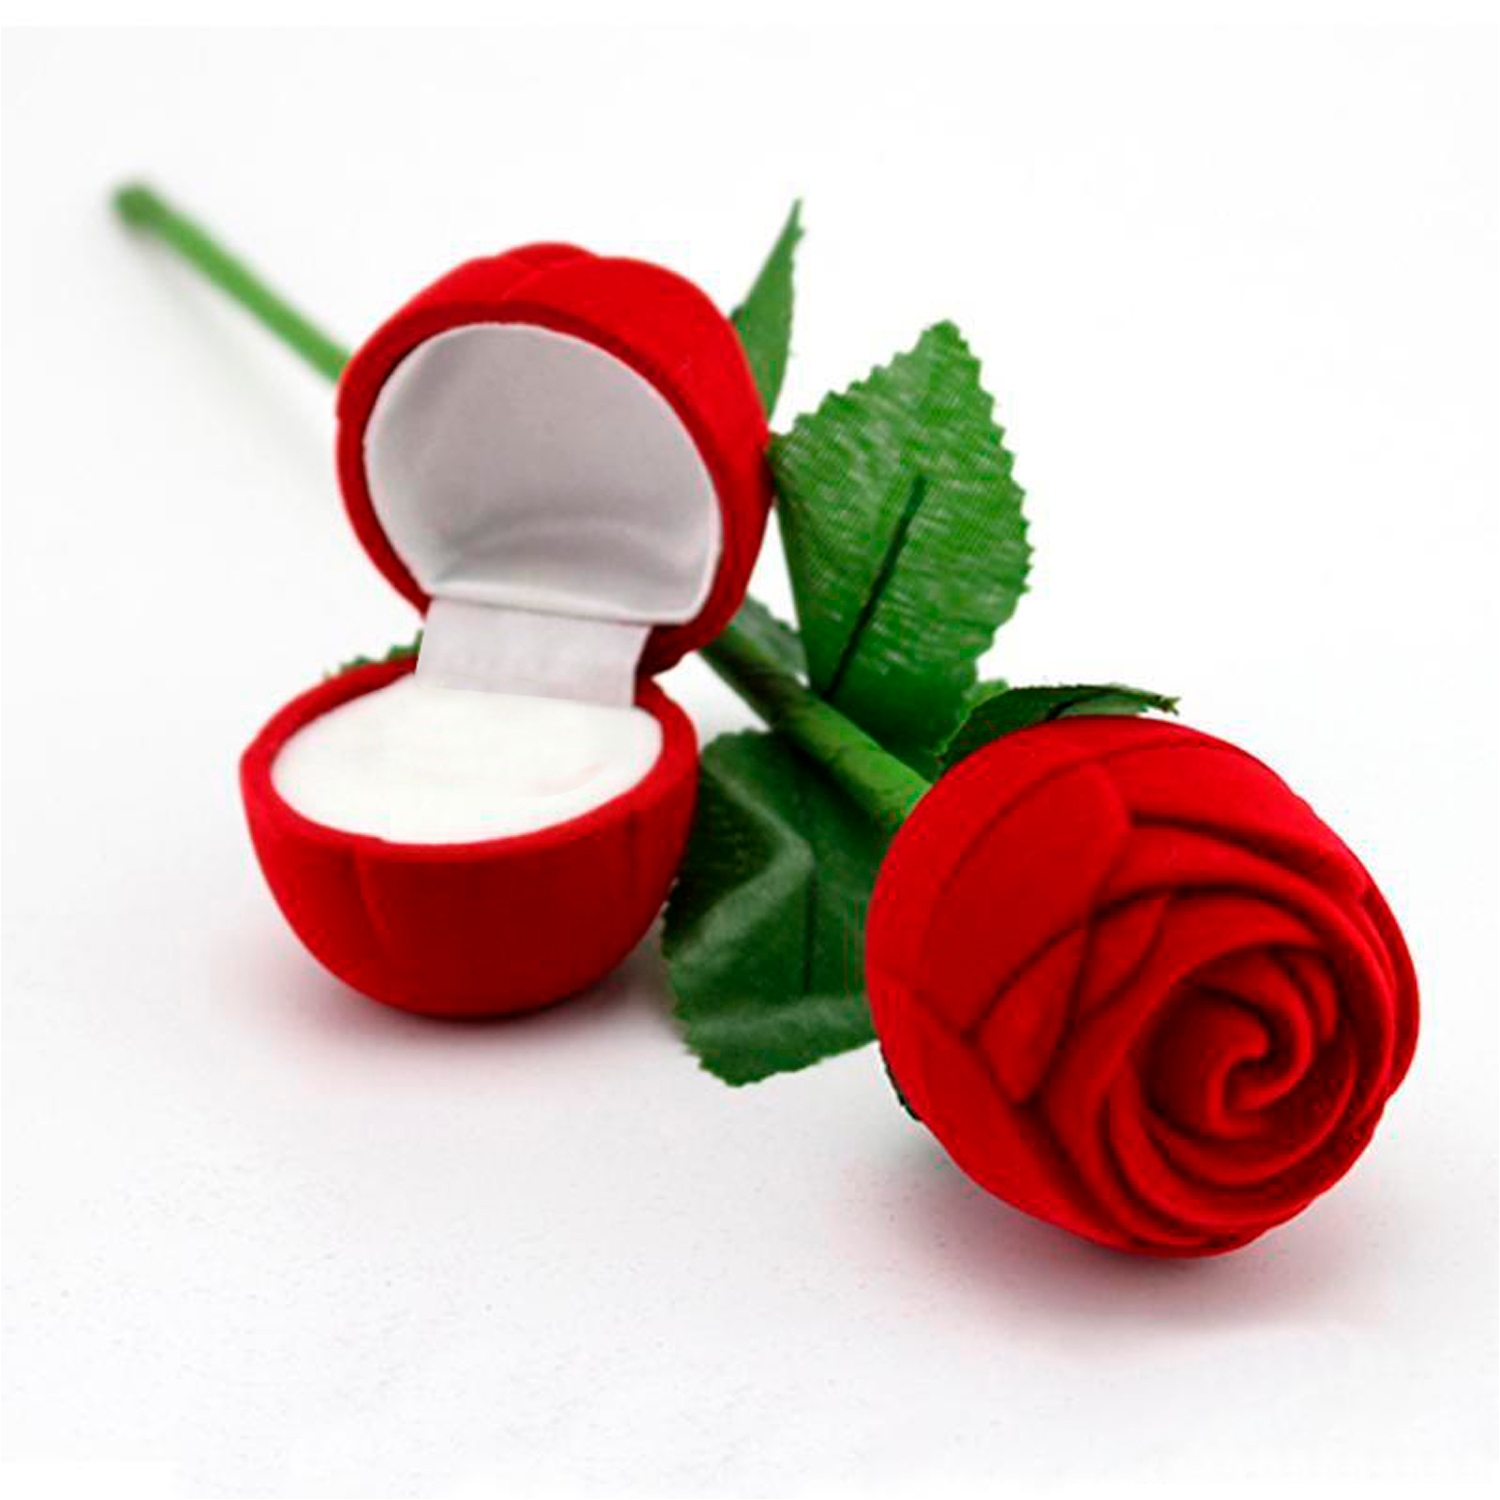 SILVER SHINE |  Adjustable Stylish Couple Rings Set for lovers with 2 Piece Red Rose Gift Box Silver Plated Stylish Ring for Men and Women  4